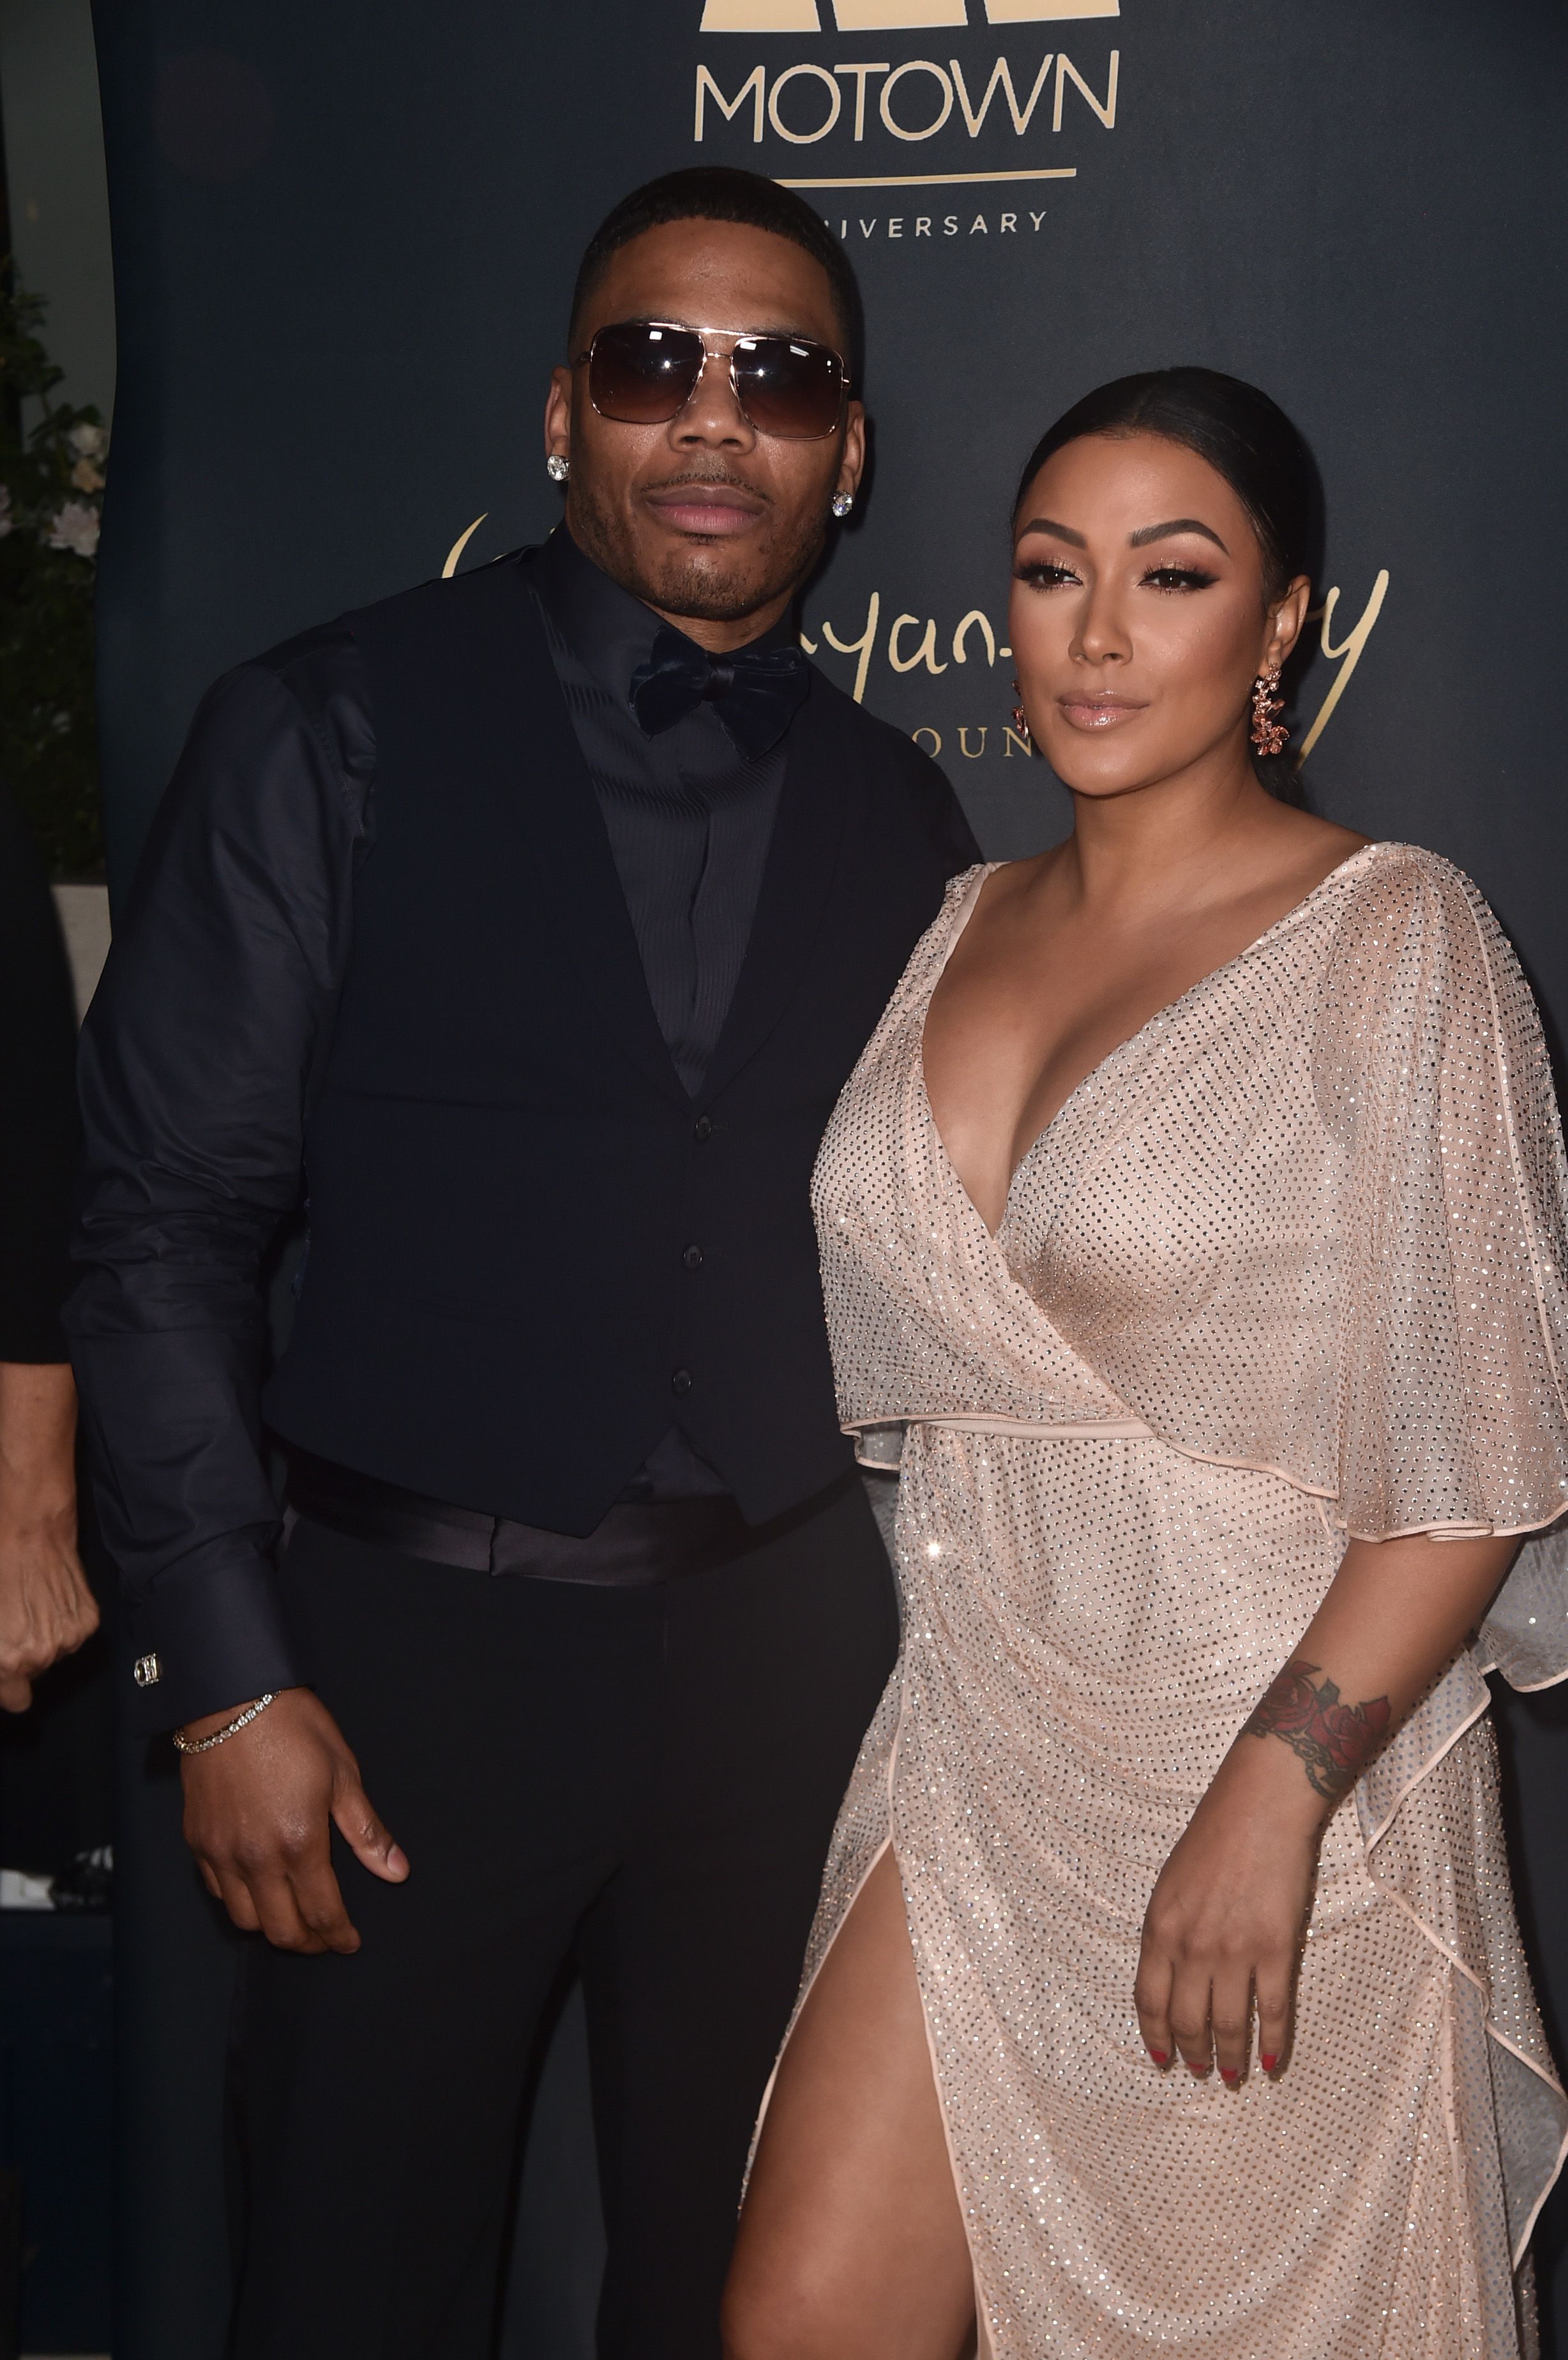 Nelly and Shantel Jackson at The Ryan Gordy Foundation Celebrates 60 Years Of Mowtown on November 11, 2019 in Beverly Hills, California | Photo: Getty Images